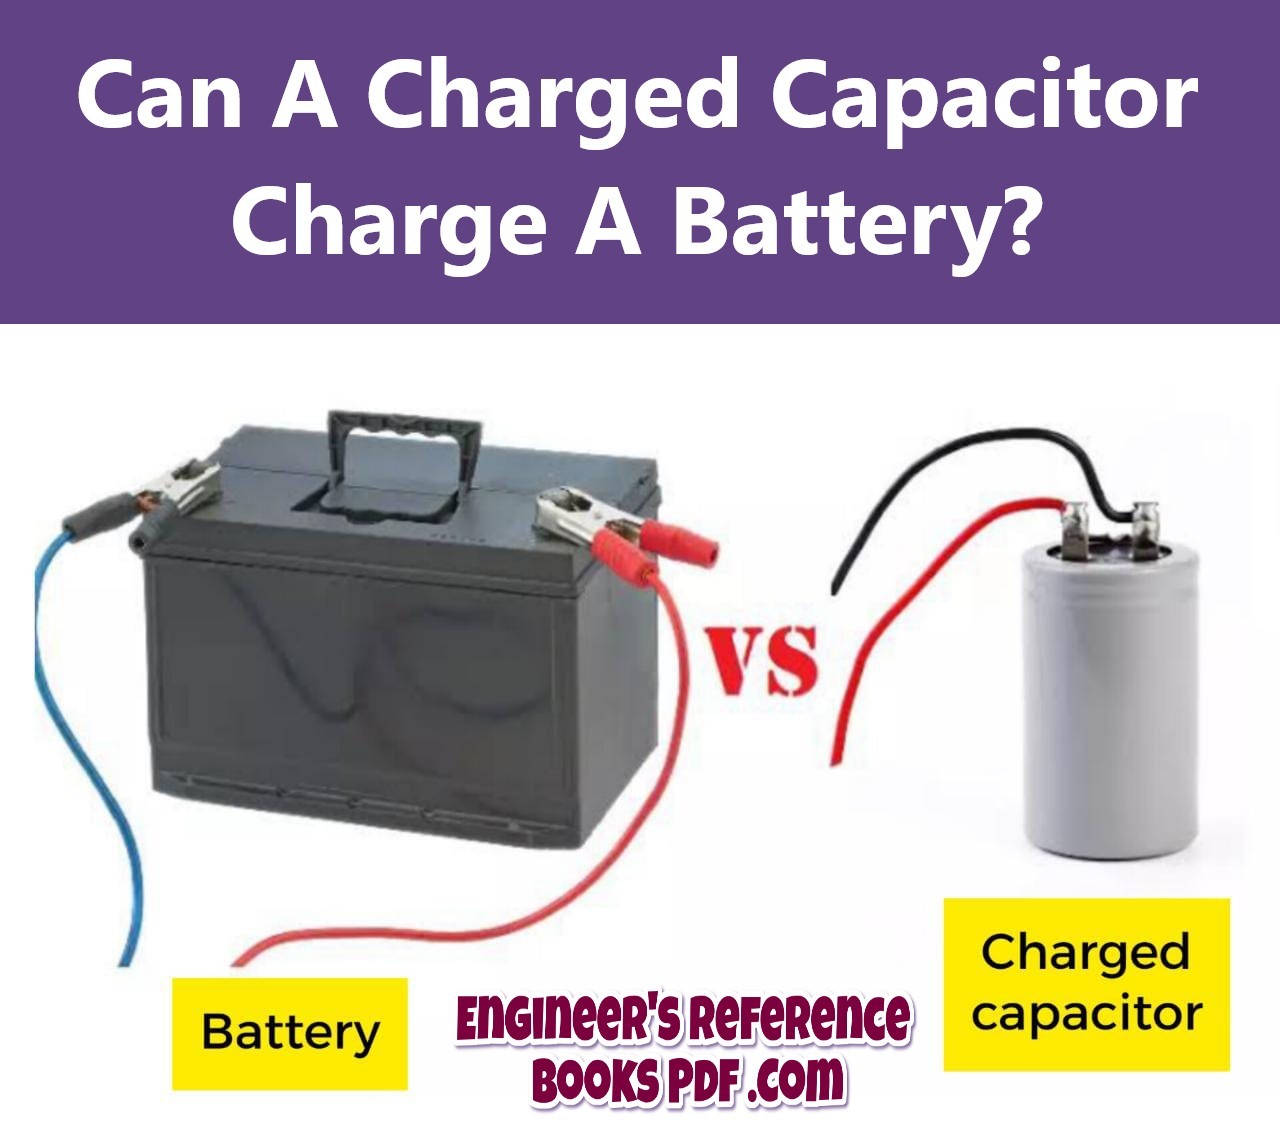 Can A Charged Capacitor Charge A Battery?